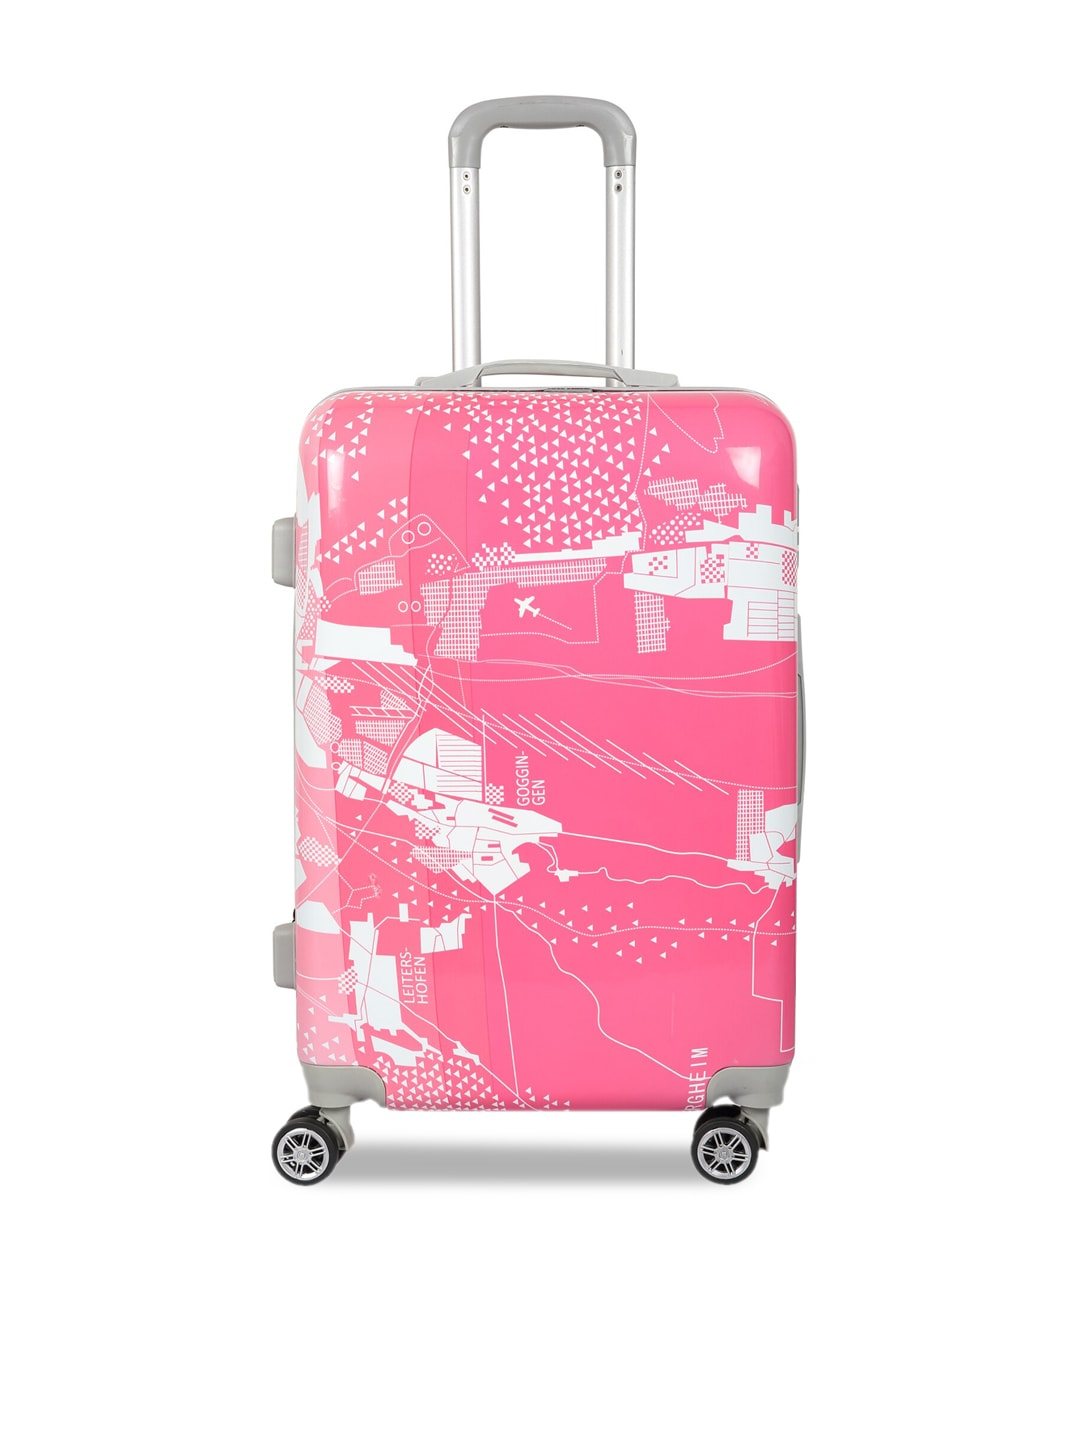 Polo Class Printed Hard-Sided Large Trolley Bag- 71 cm